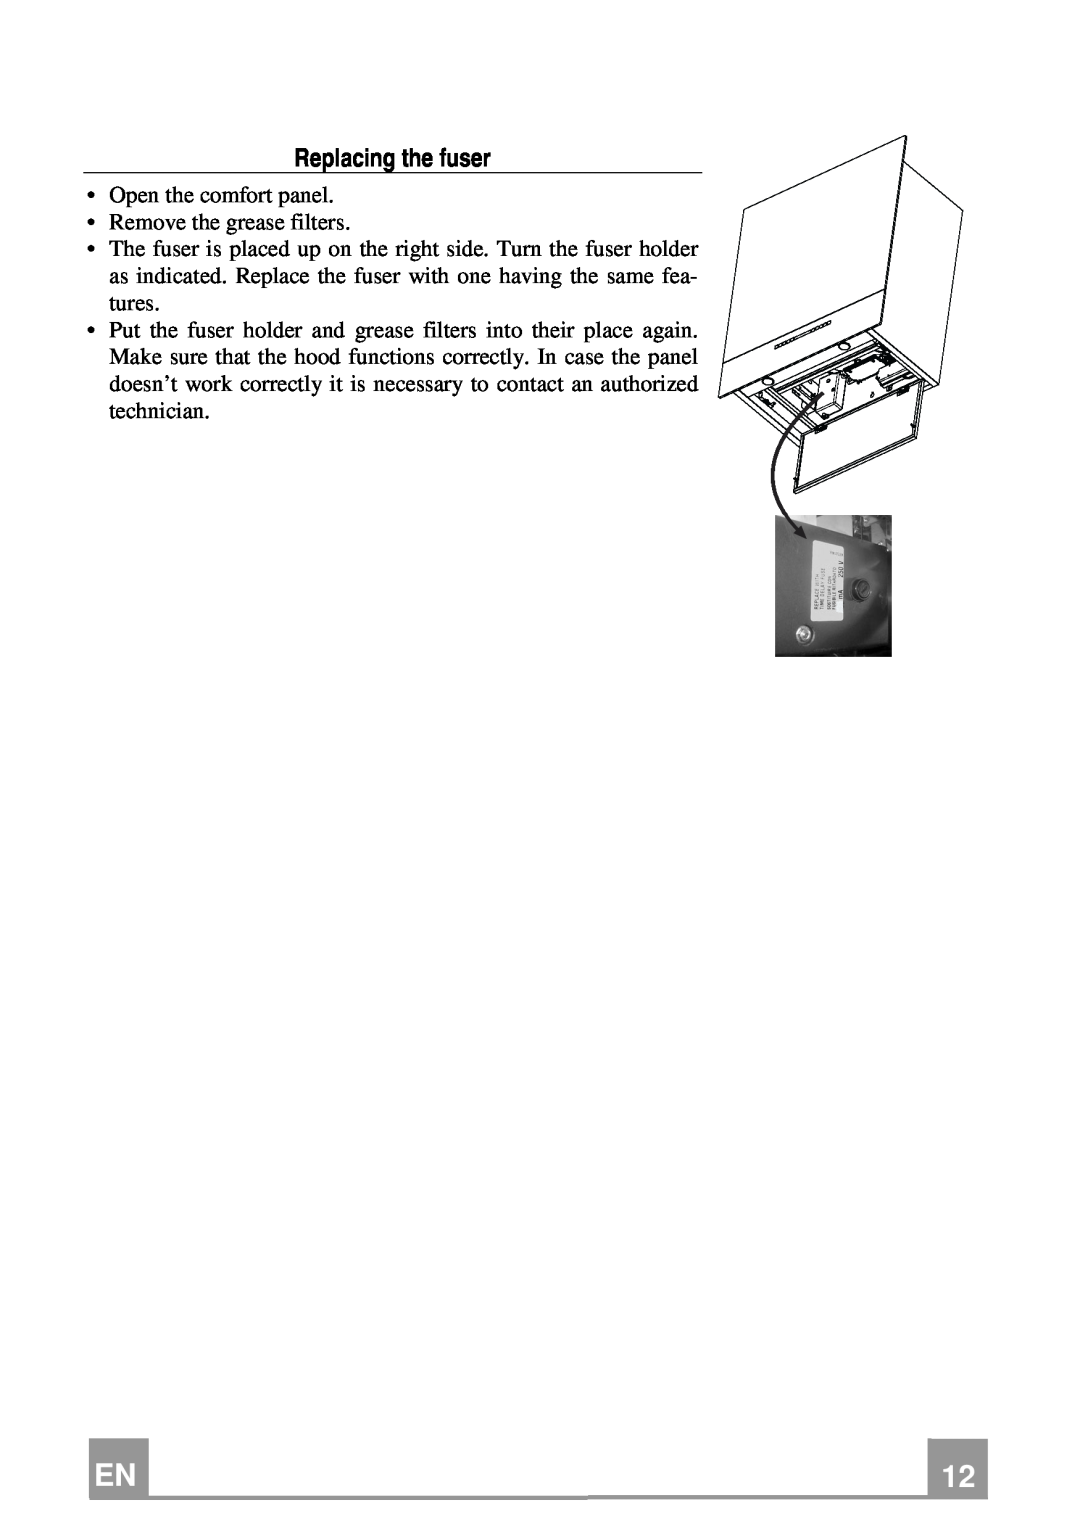 Franke Consumer Products FCR 708-H TC manual Replacing the fuser 